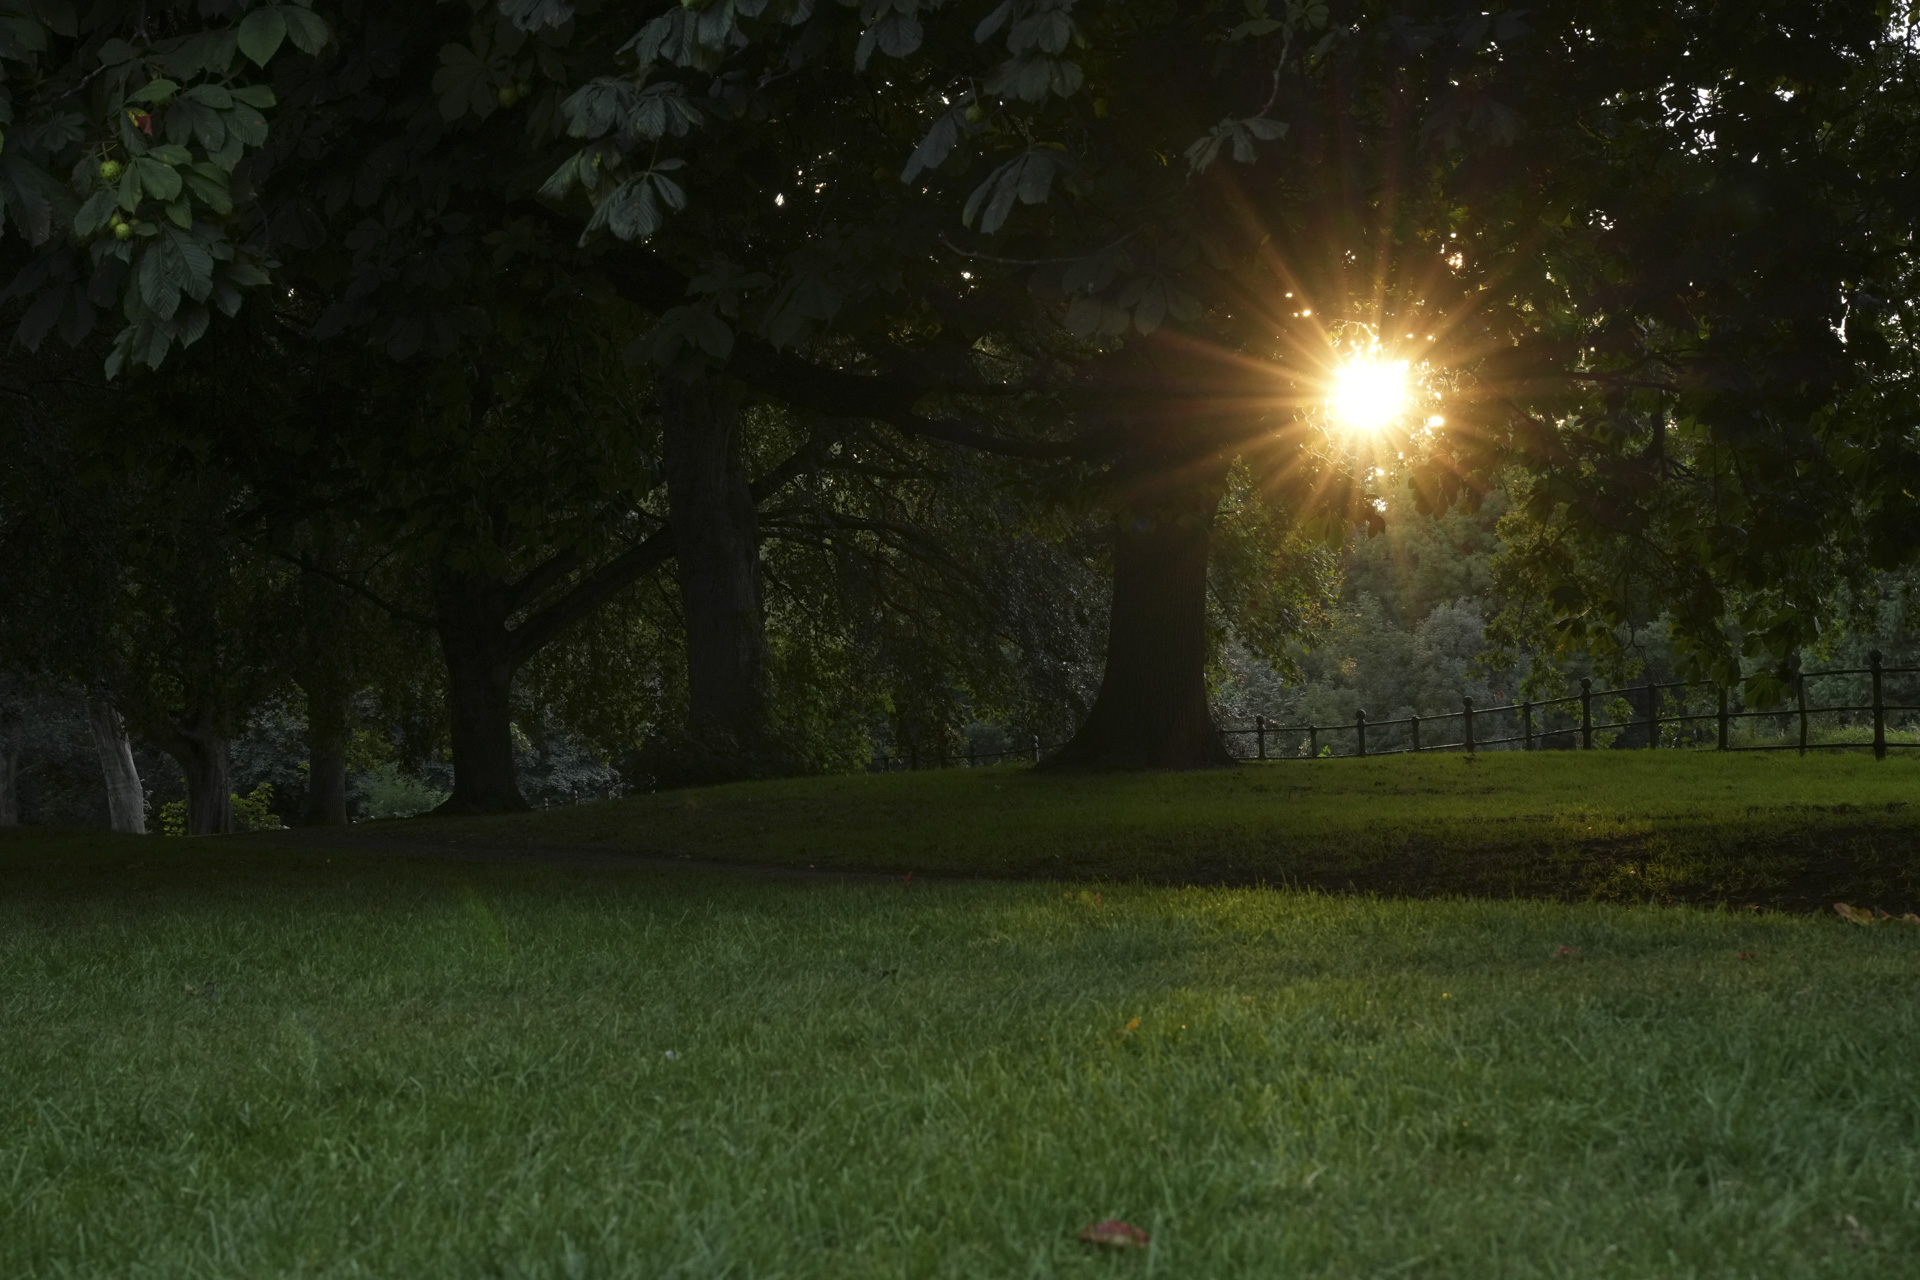 A tree lined public park with sunburst through the trees, taken with the Sony FE 20-70mm F4 lens and A7C R